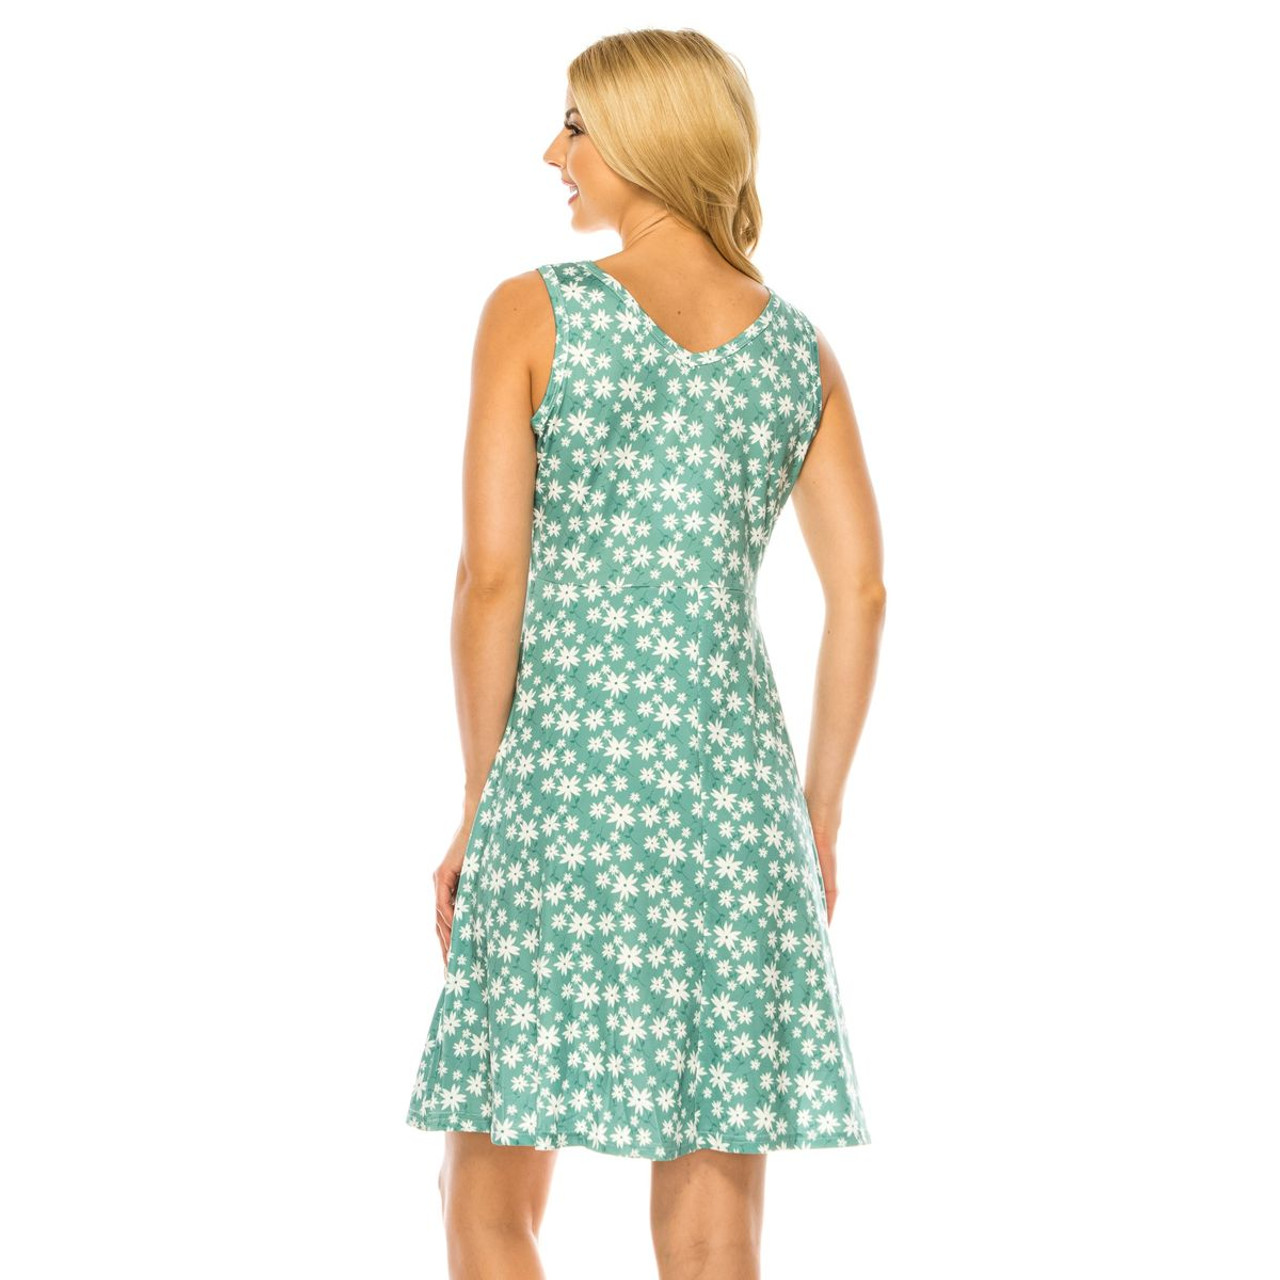 Women's Printed Floral Sleeveless Skater Dress product image